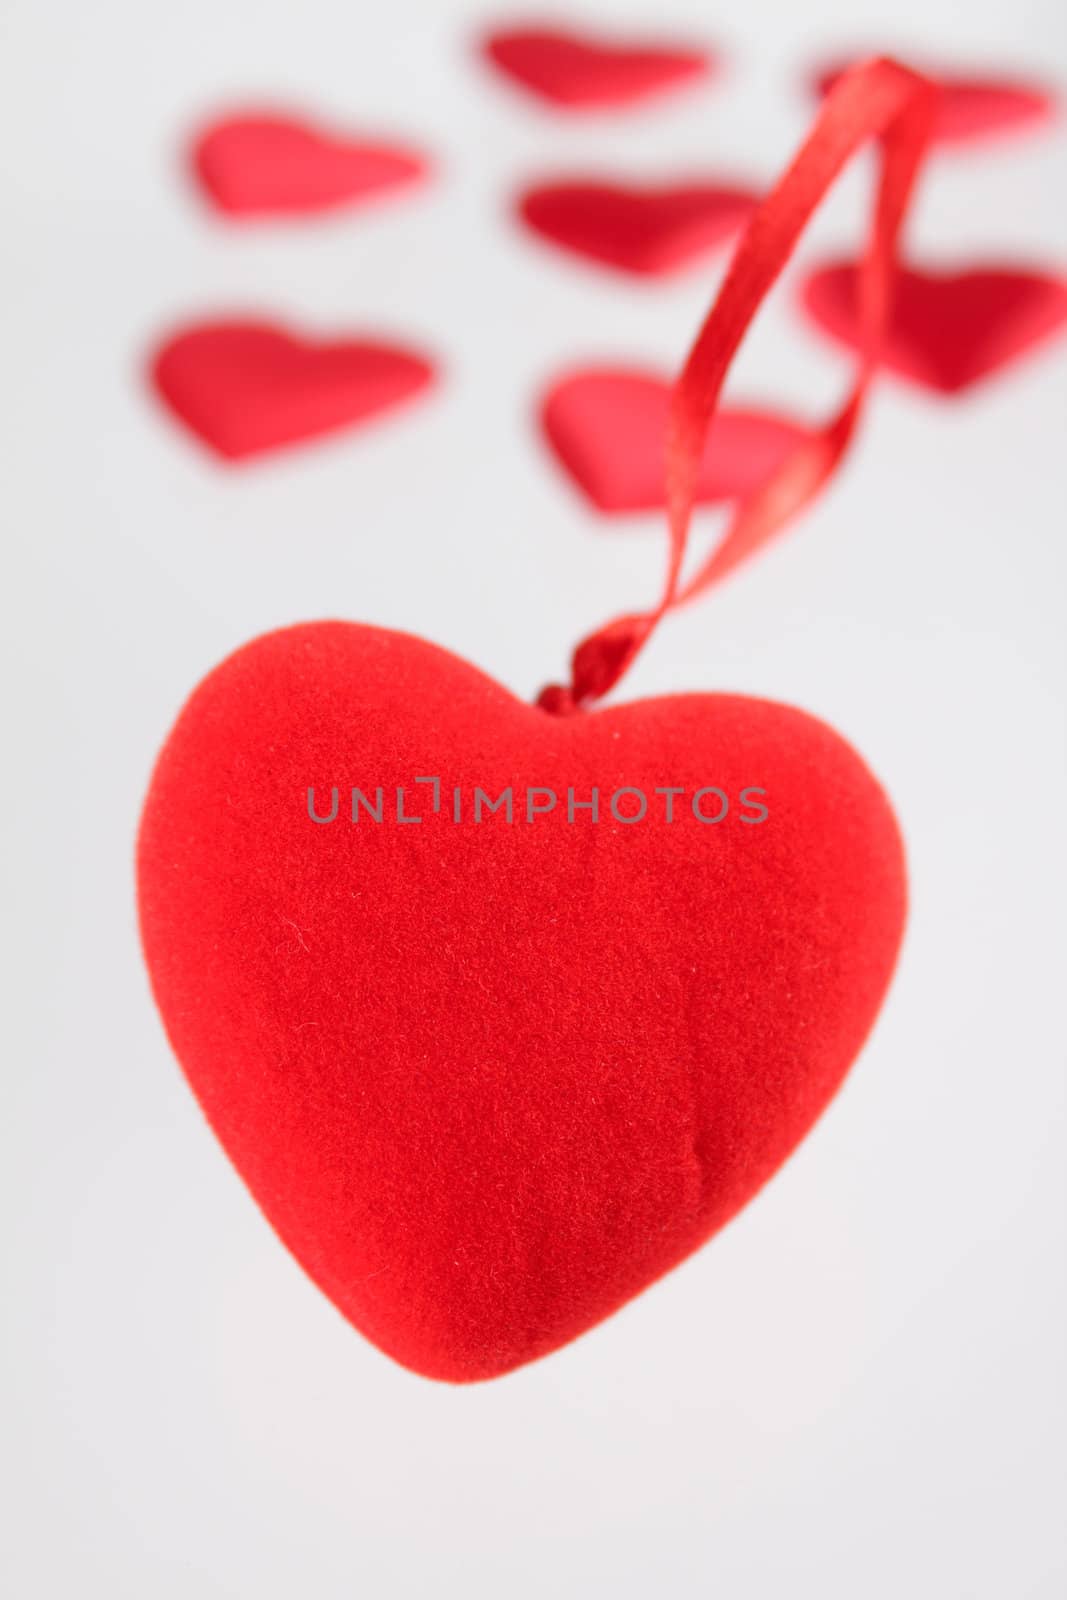 Red plush heart against small hearts removed close up